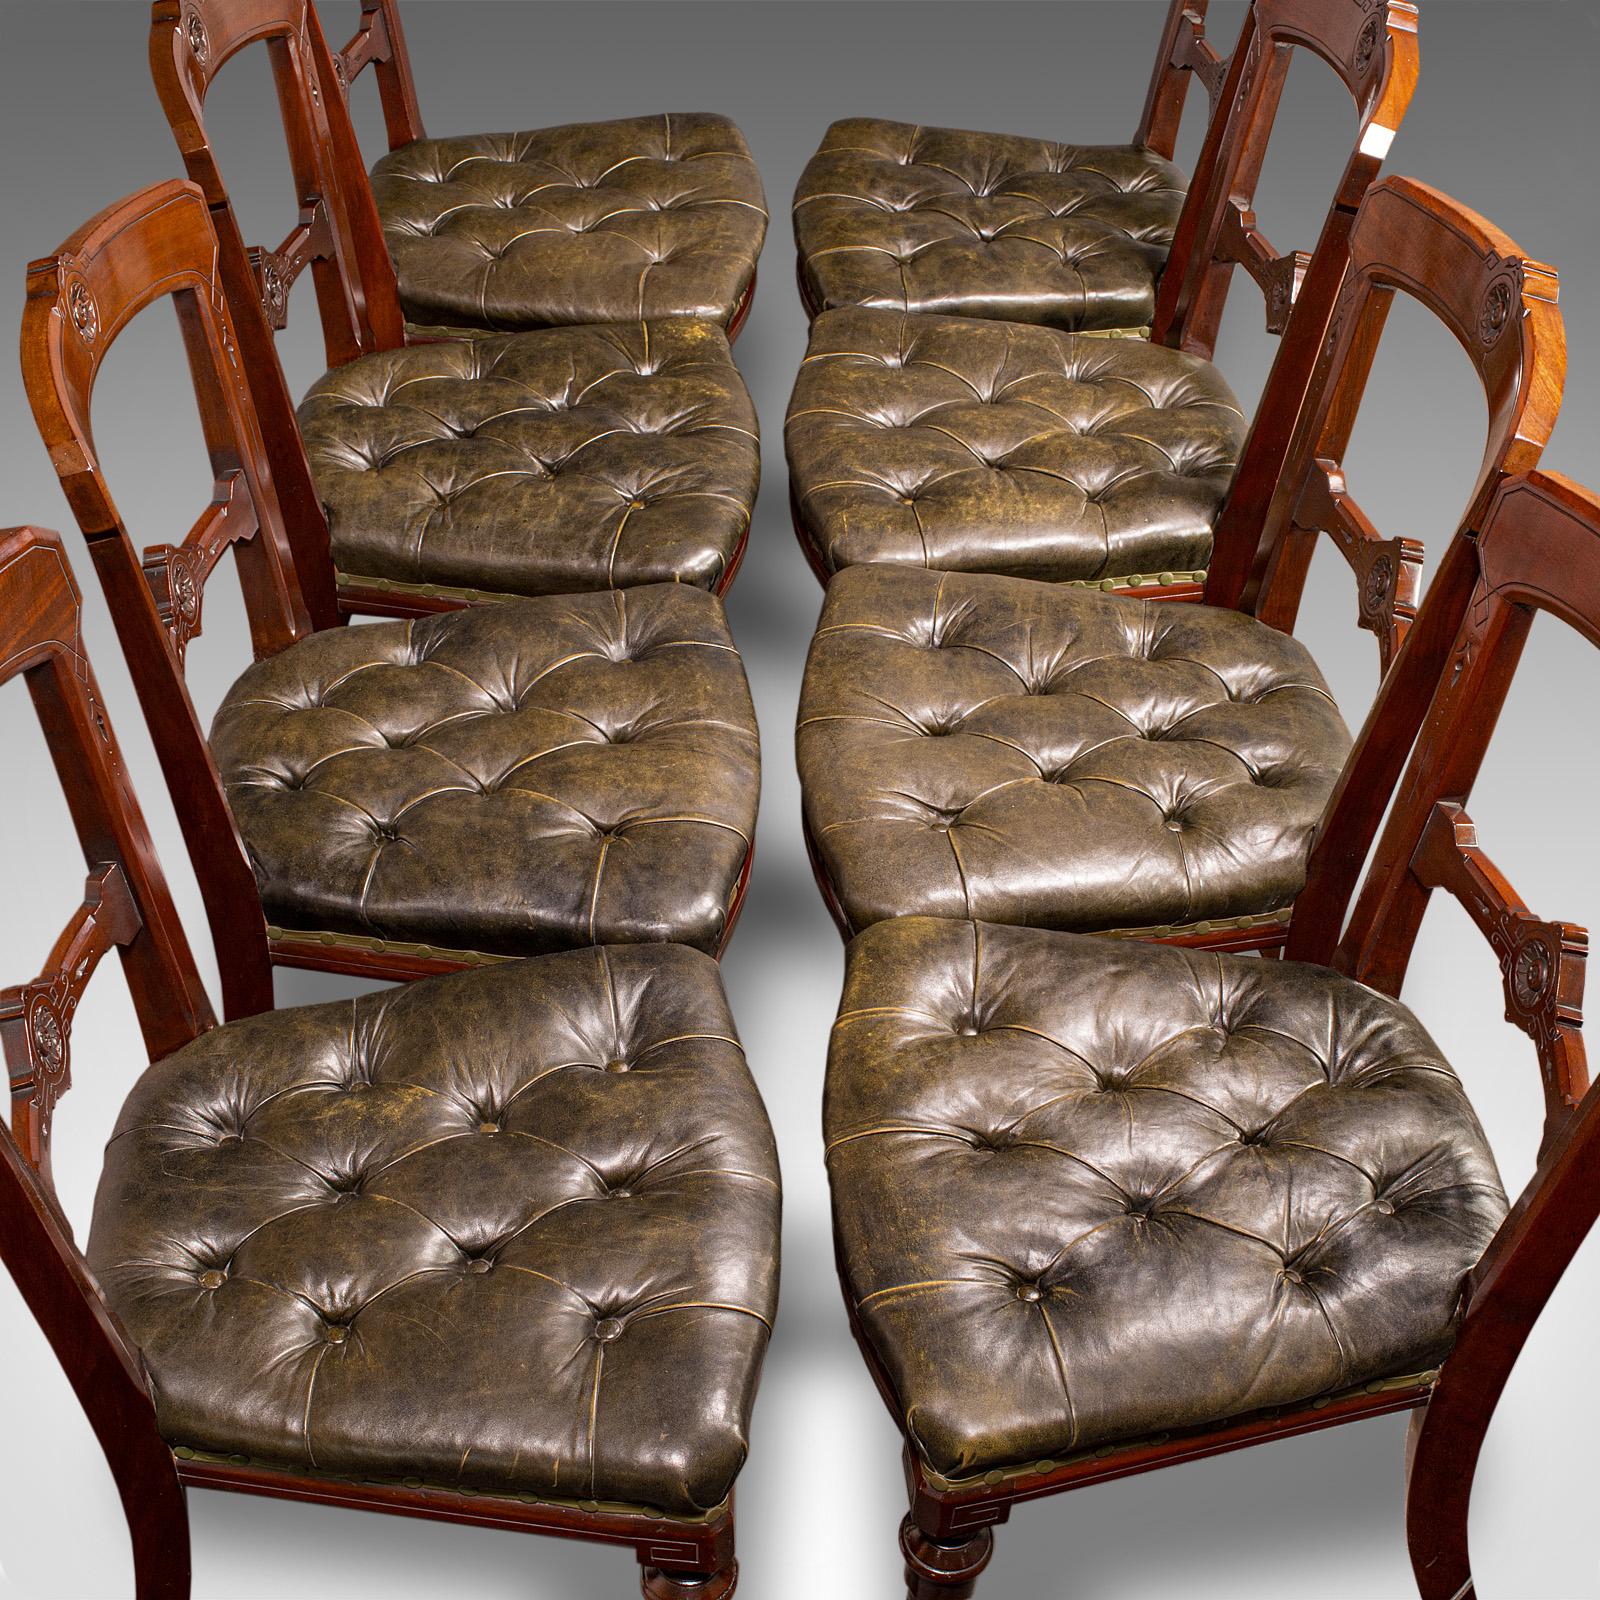 Set of 8 Antique Dining Chairs, English, Walnut, Leather, Victorian, Circa 1870 For Sale 1